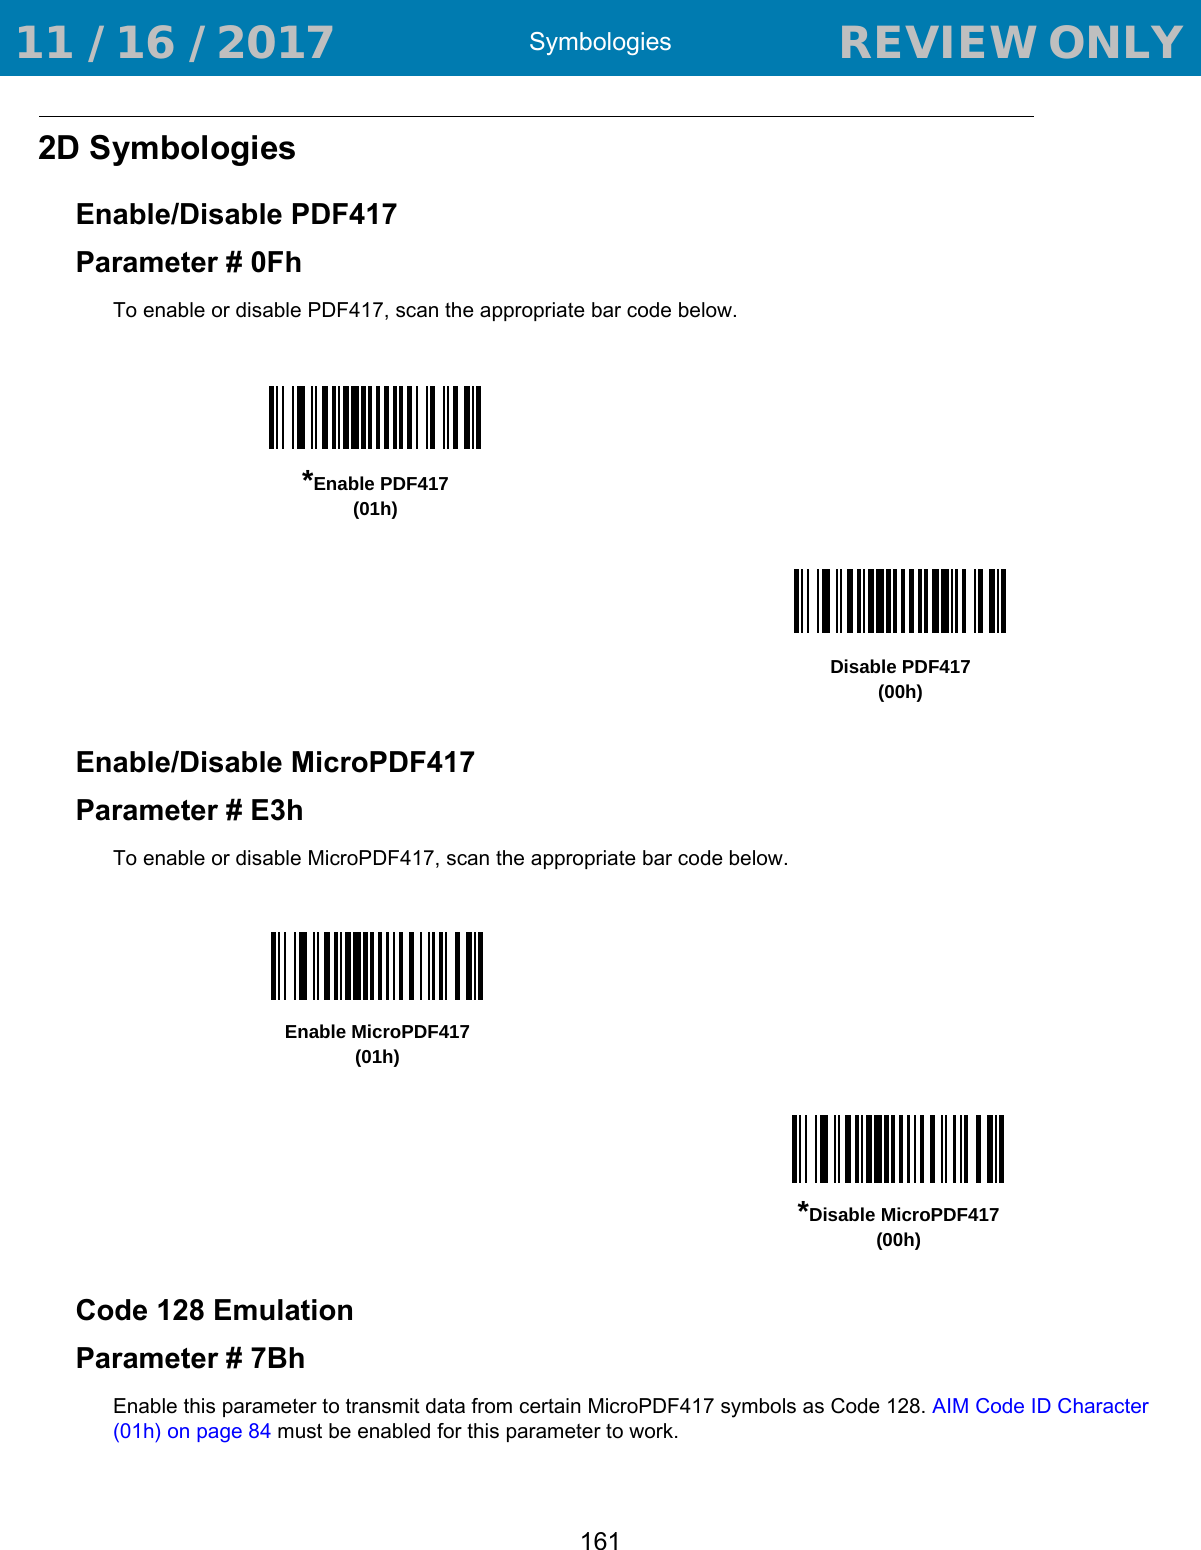 Symbologies1612D SymbologiesEnable/Disable PDF417Parameter # 0FhTo enable or disable PDF417, scan the appropriate bar code below. Enable/Disable MicroPDF417Parameter # E3hTo enable or disable MicroPDF417, scan the appropriate bar code below. Code 128 EmulationParameter # 7BhEnable this parameter to transmit data from certain MicroPDF417 symbols as Code 128. AIM Code ID Character (01h) on page 84 must be enabled for this parameter to work.*Enable PDF417(01h)Disable PDF417(00h)Enable MicroPDF417(01h)*Disable MicroPDF417(00h) 11 / 16 / 2017                                  REVIEW ONLY                             REVIEW ONLY - REVIEW ONLY - REVIEW ONLY